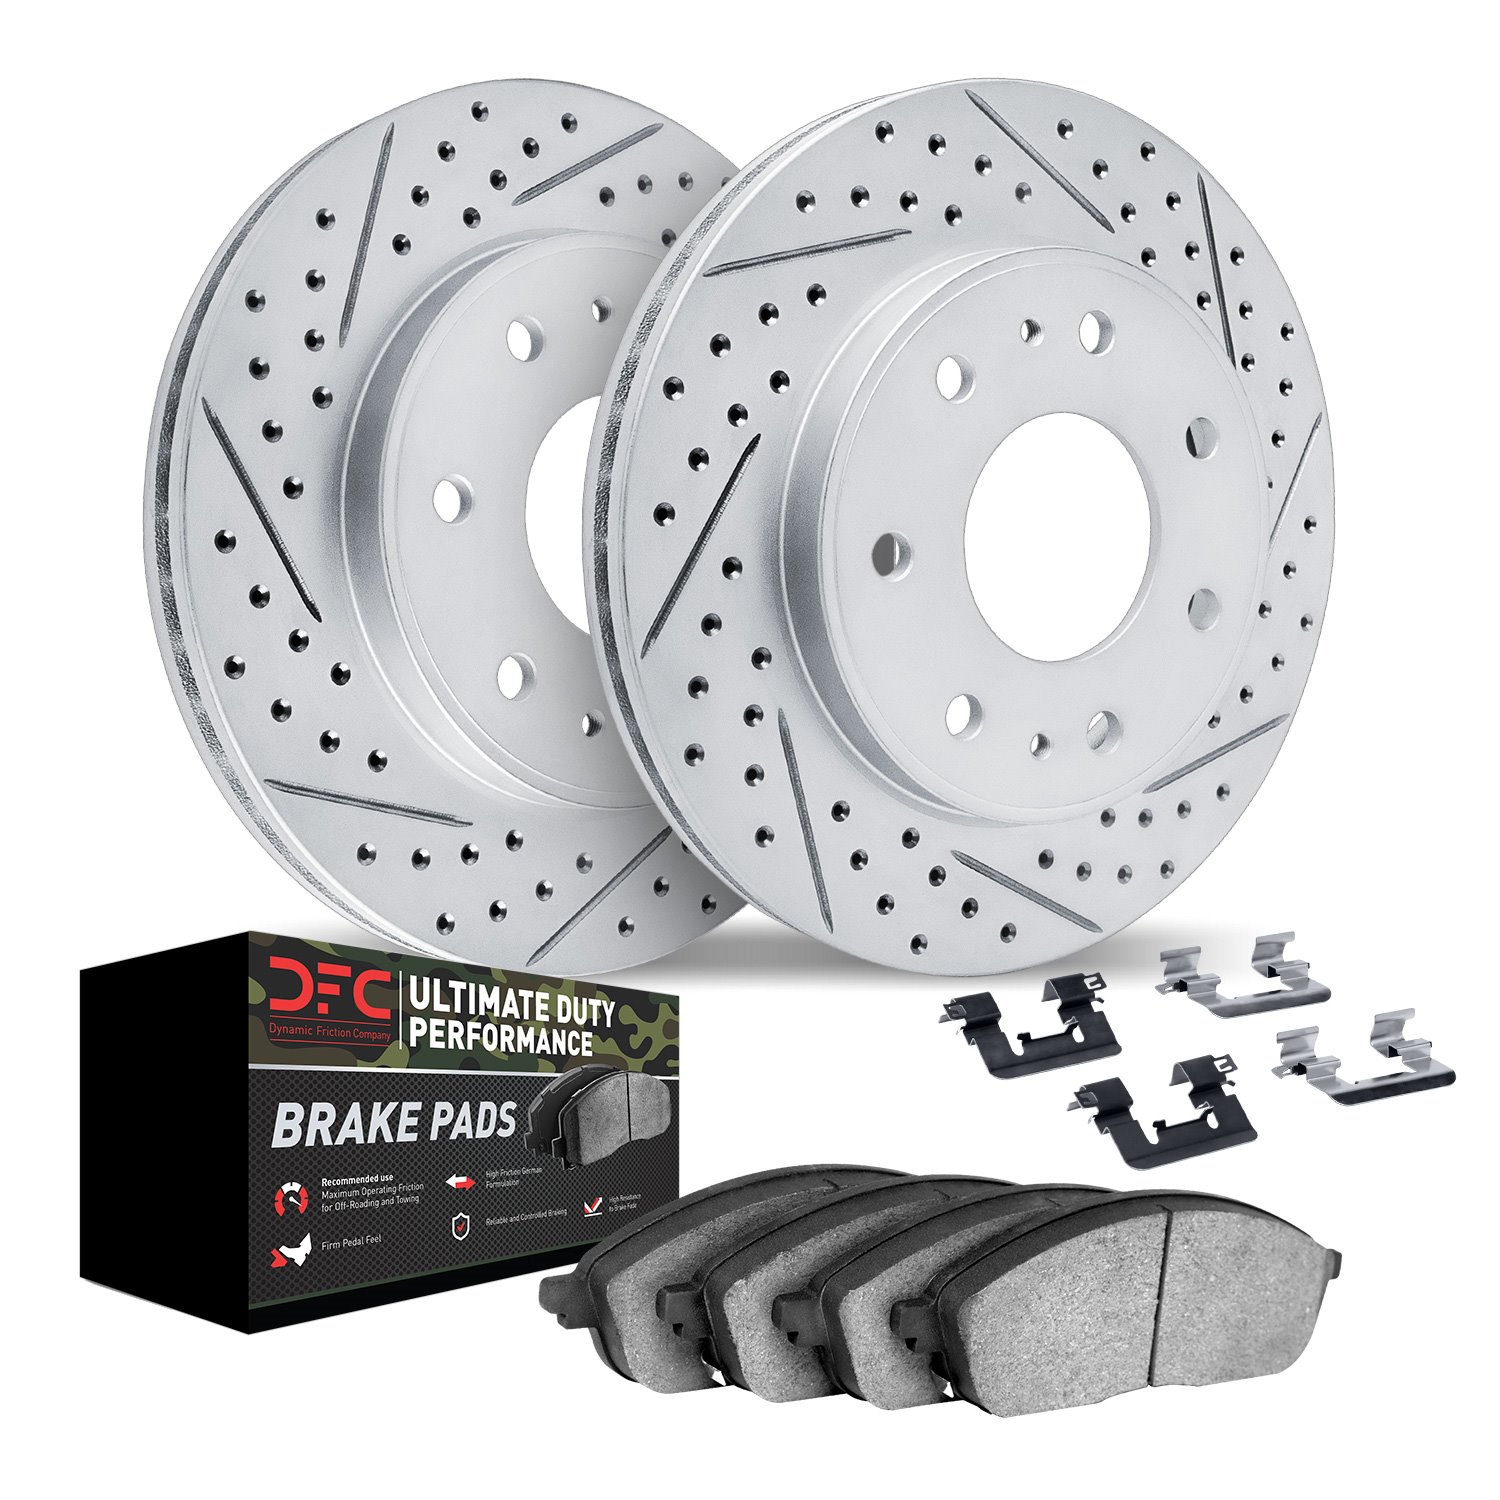 2412-54069 Geoperformance Drilled/Slotted Brake Rotors with Ultimate-Duty Brake Pads Kit & Hardware, 2012-2014 Ford/Lincoln/Merc